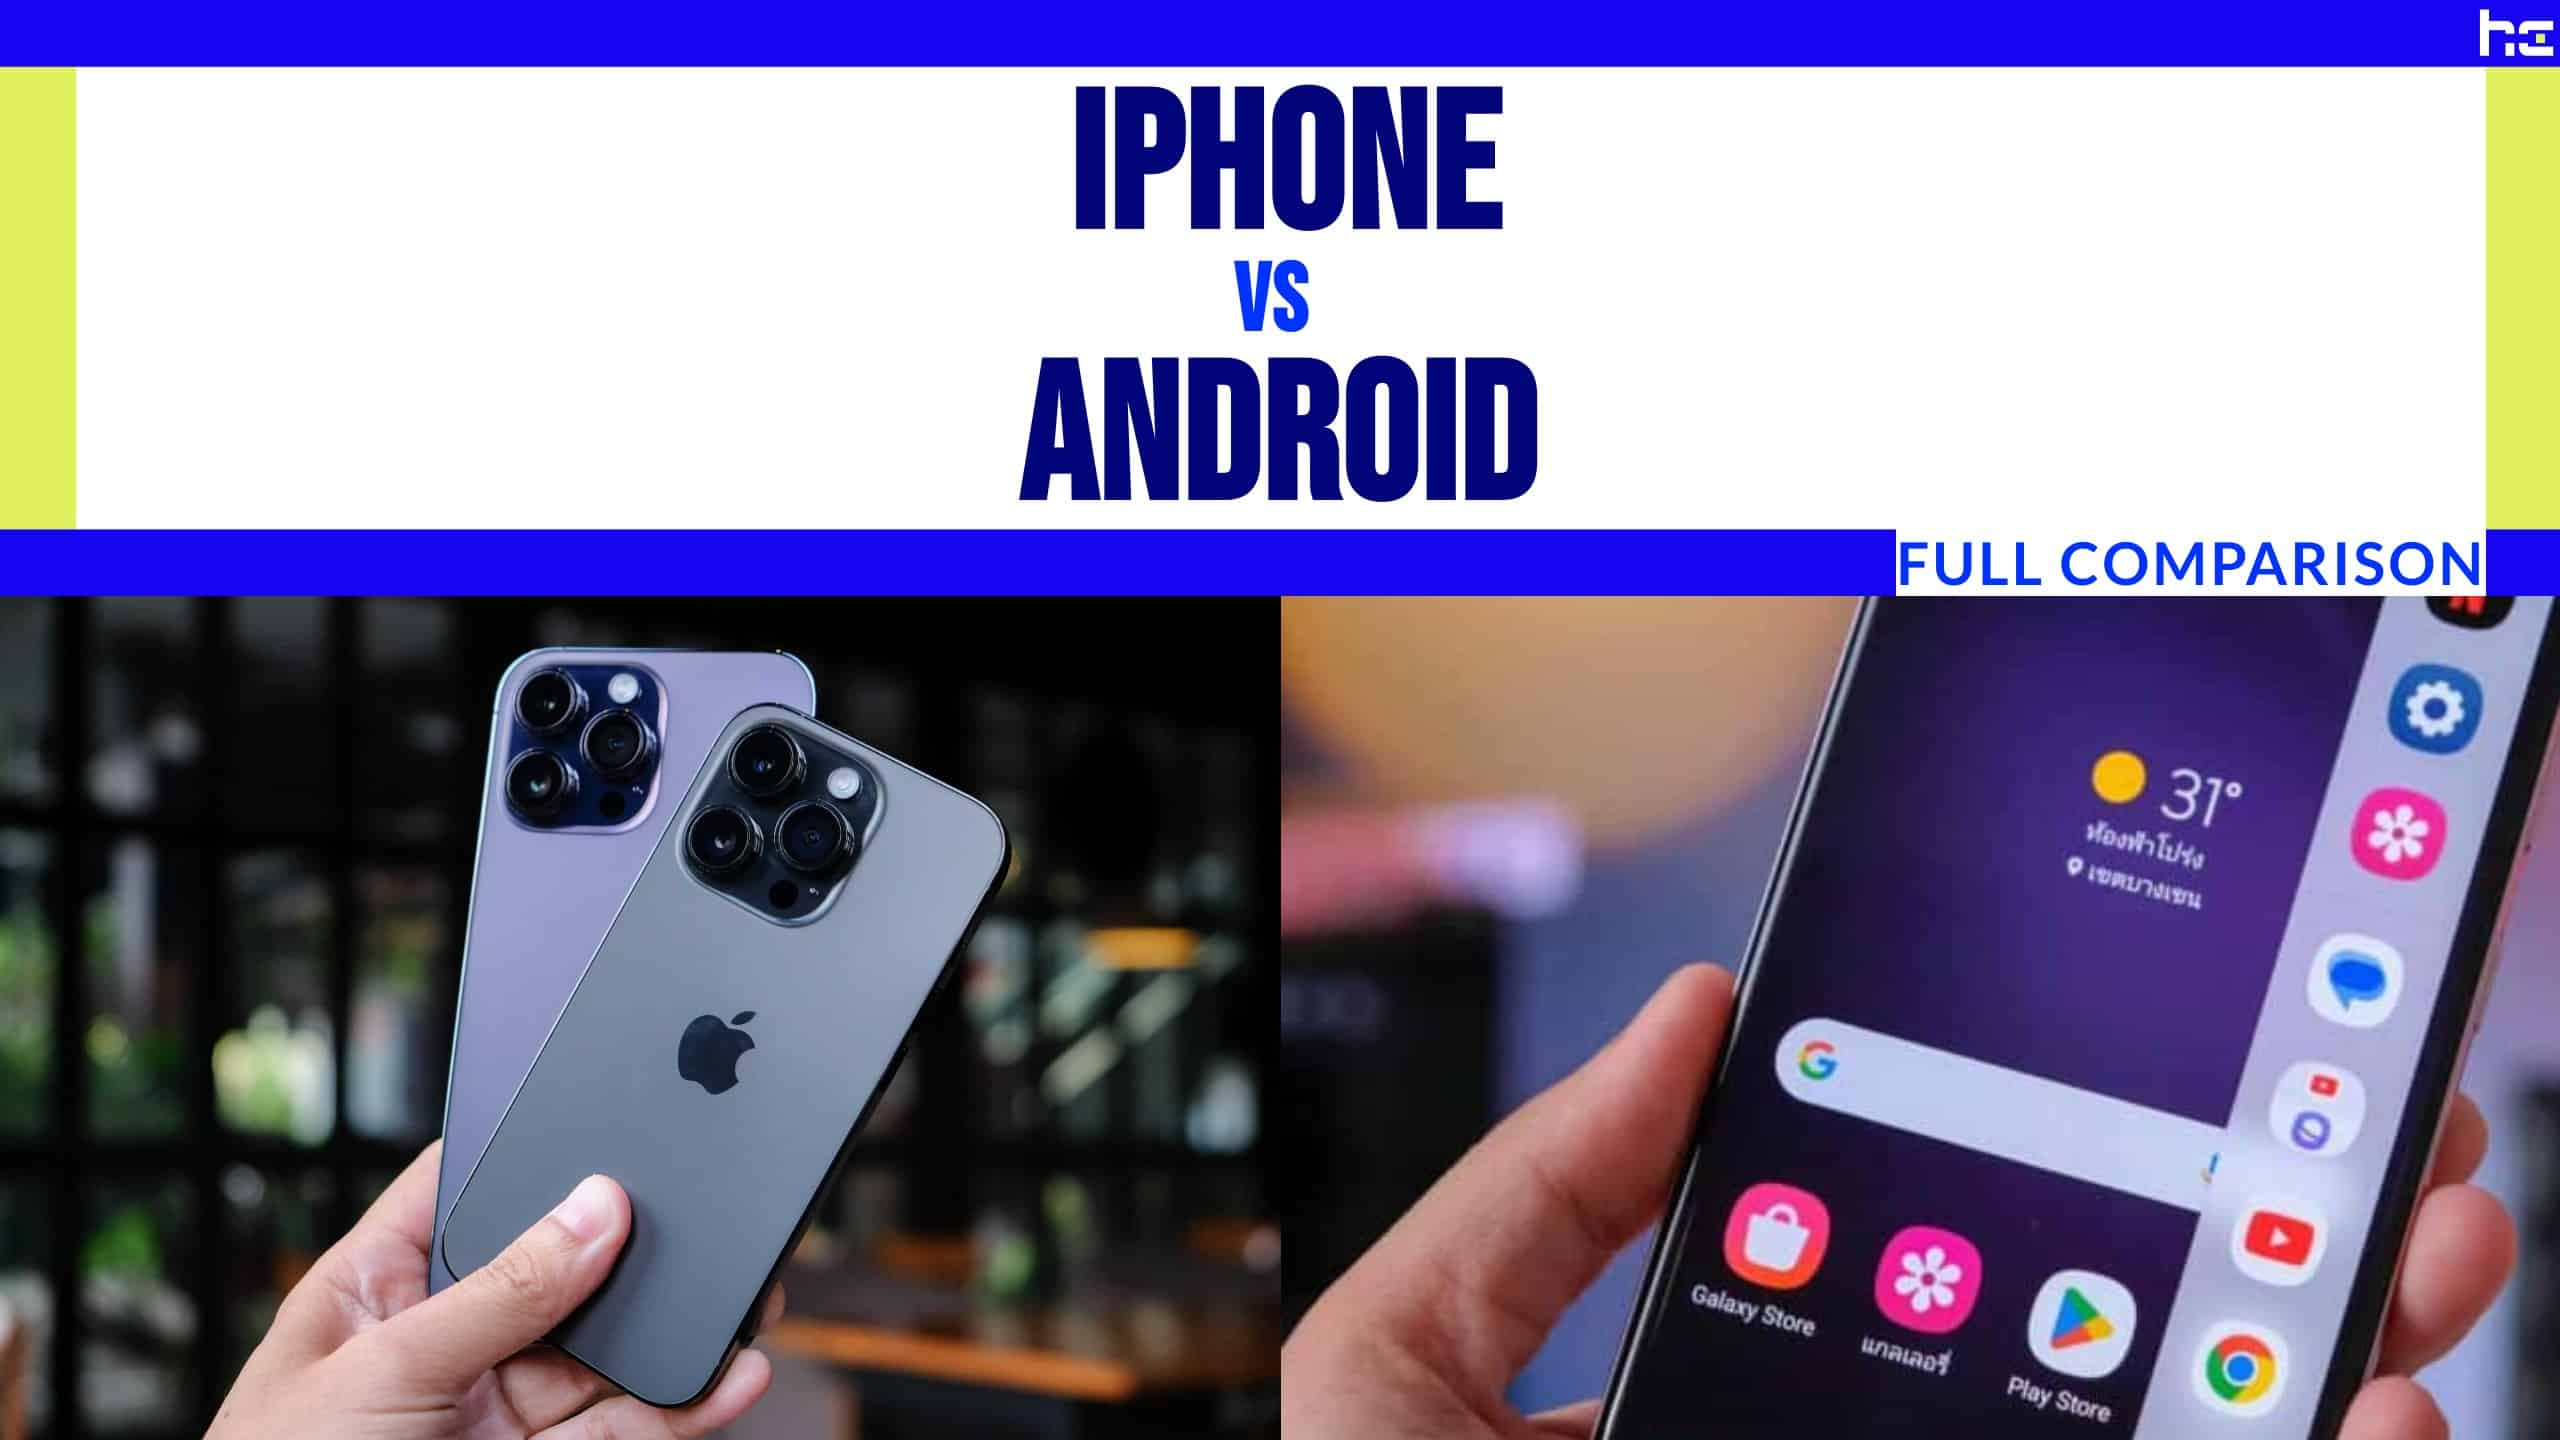 iphone vs android featured image